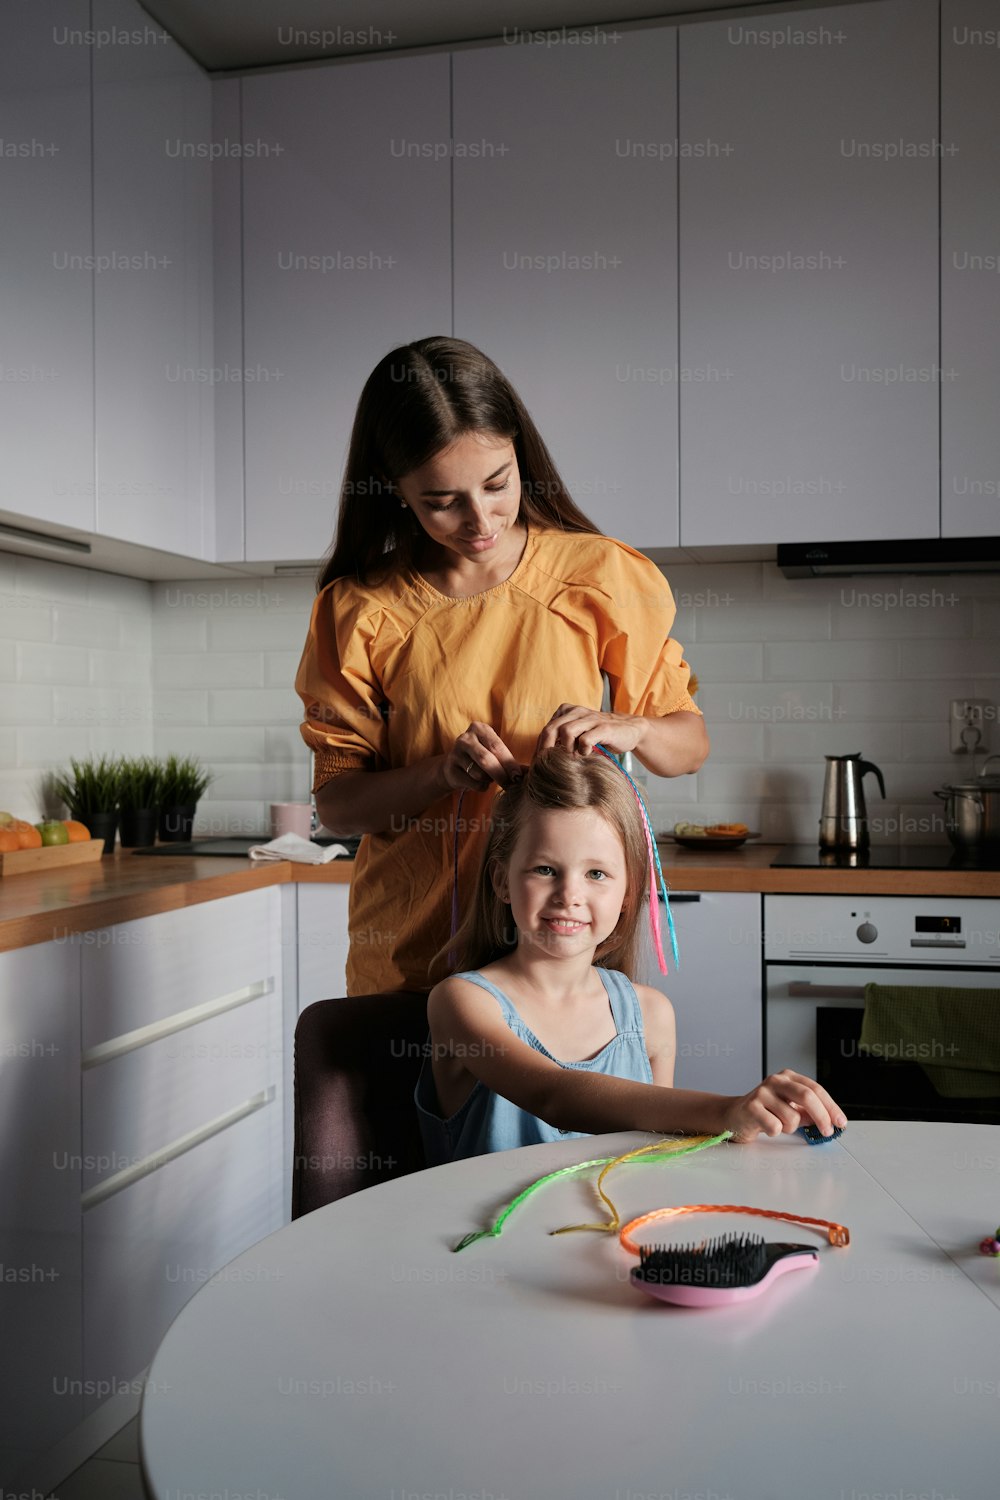 a woman combing a little girl's hair in a kitchen